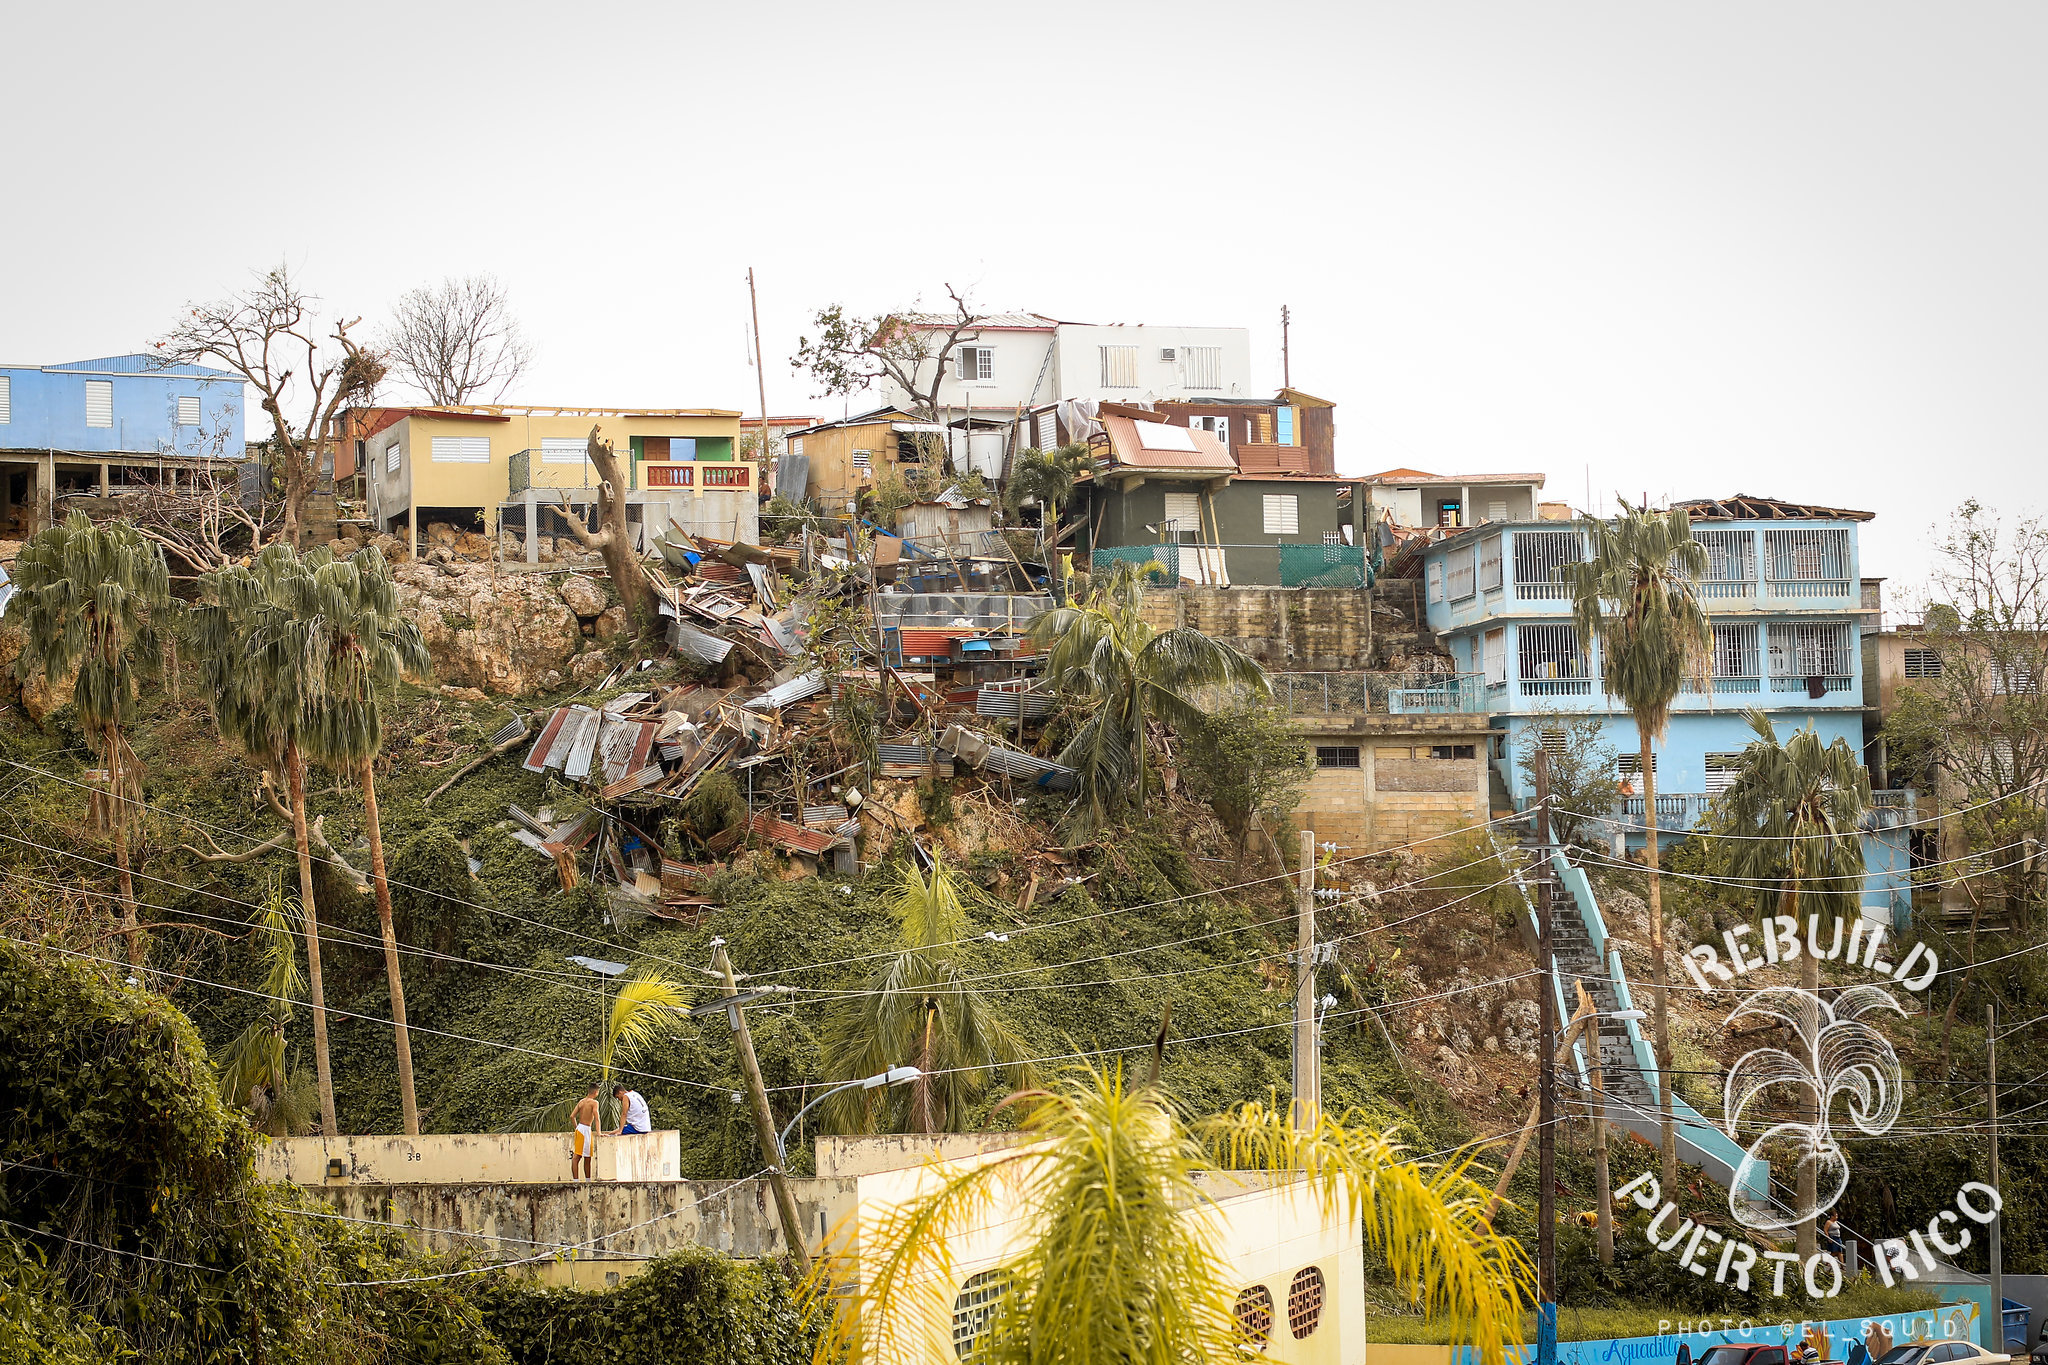 Entire neighborhoods destroyed. People's lives changed forever. // Photo by Anthony Dooley